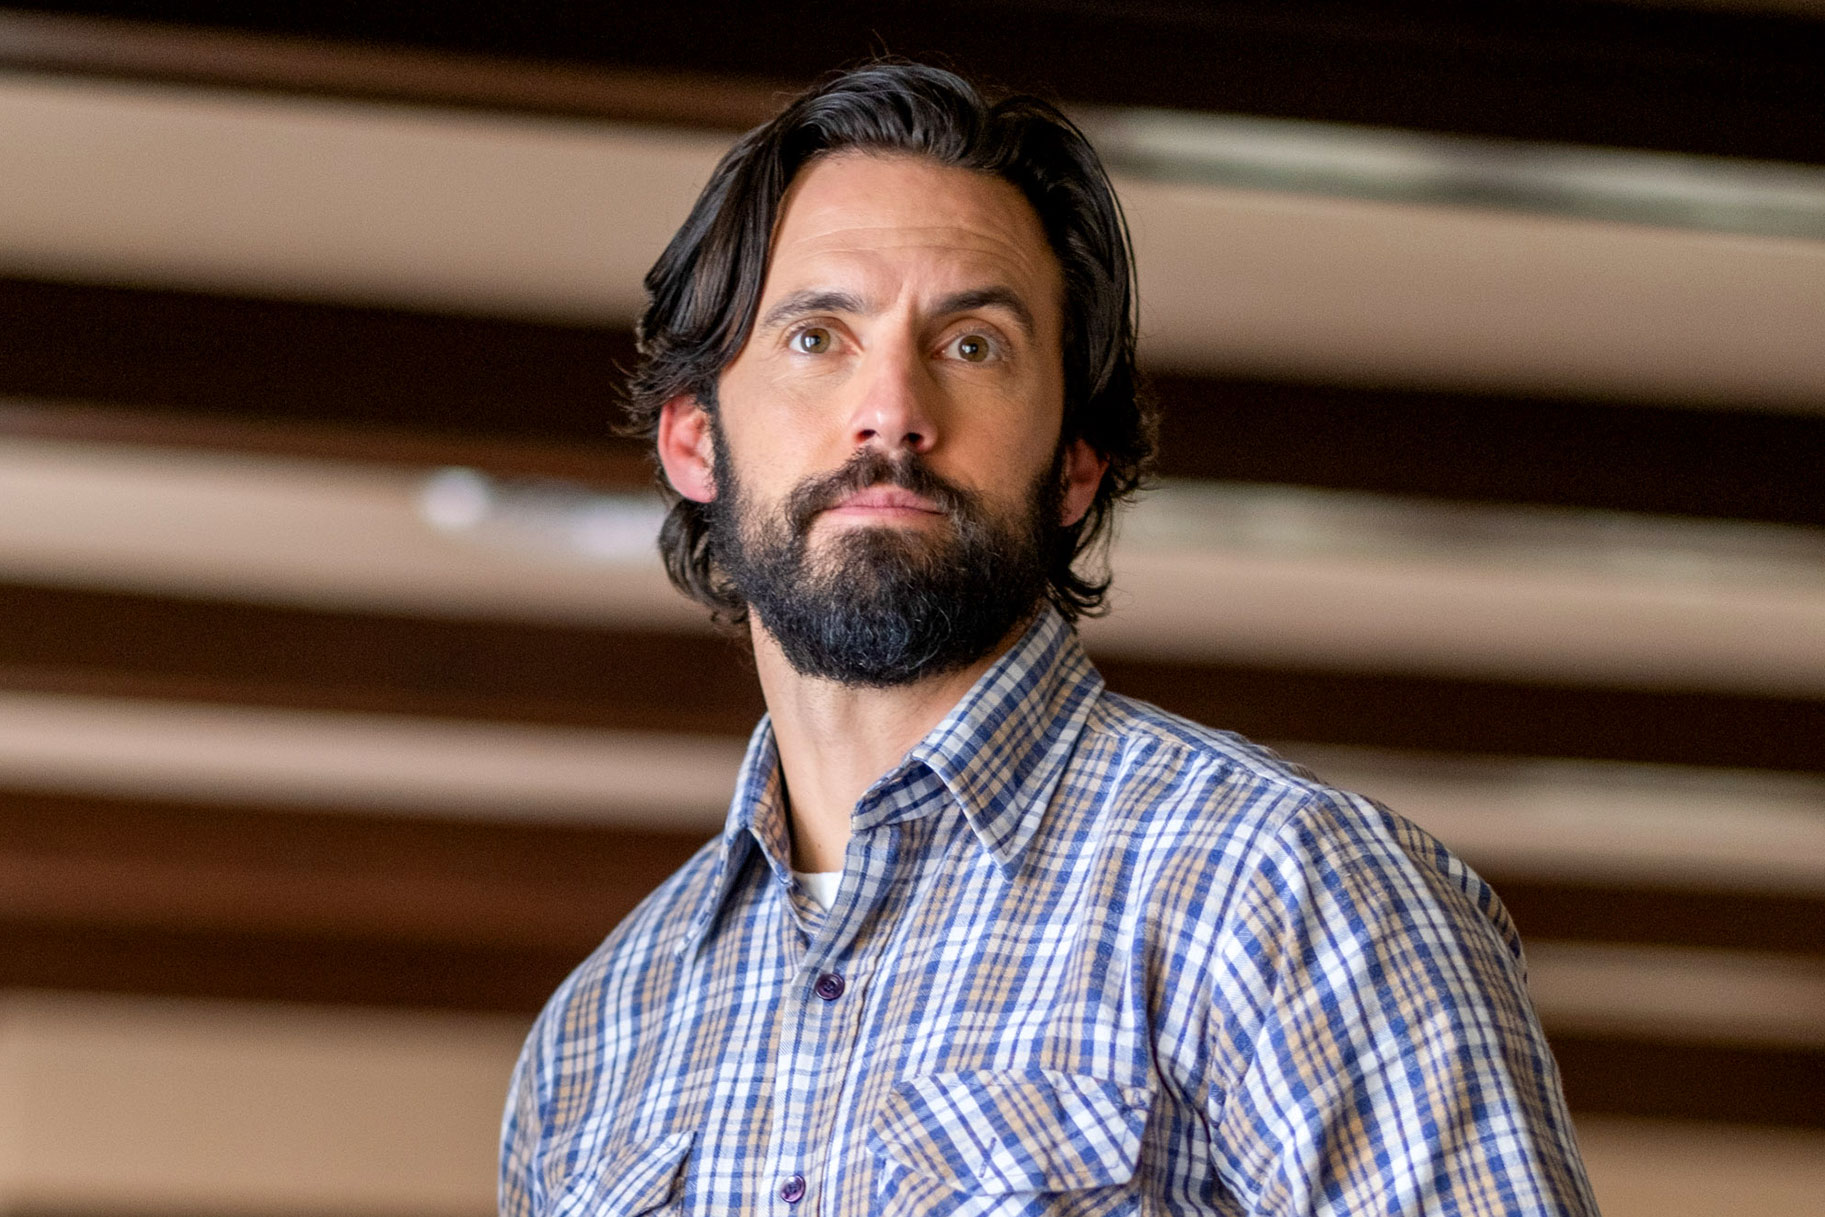 Milo Ventimiglia on the Saddest Thing About Filming This Is Us | NBC Insider